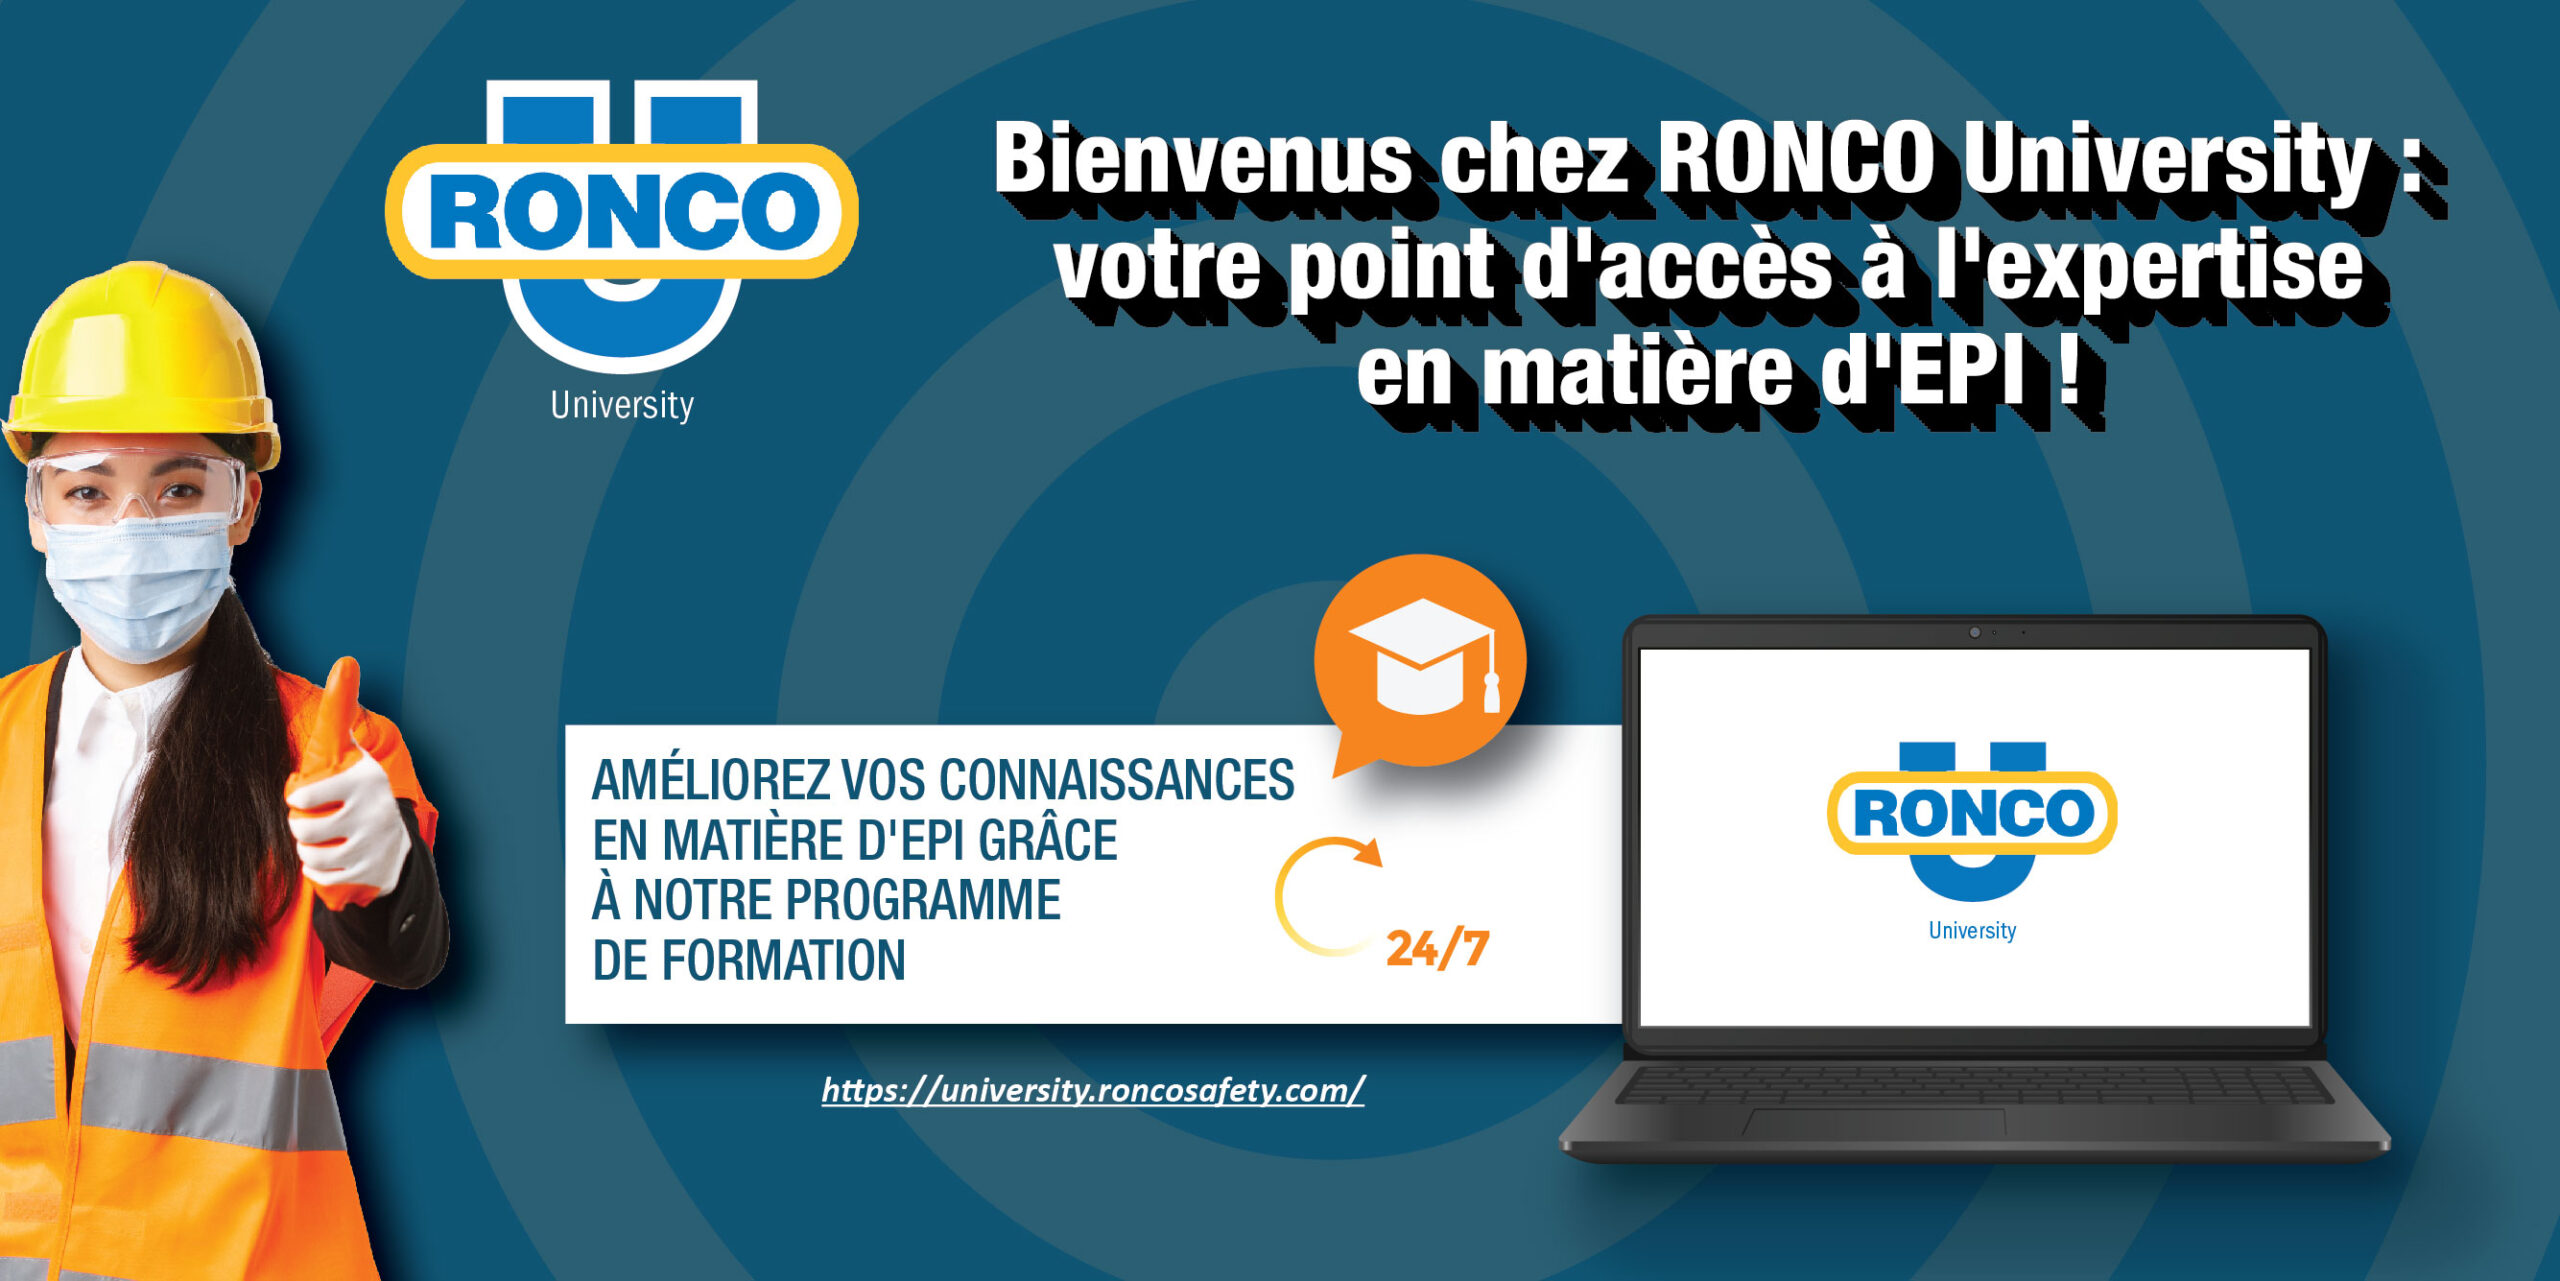 RONCO-Banner-image